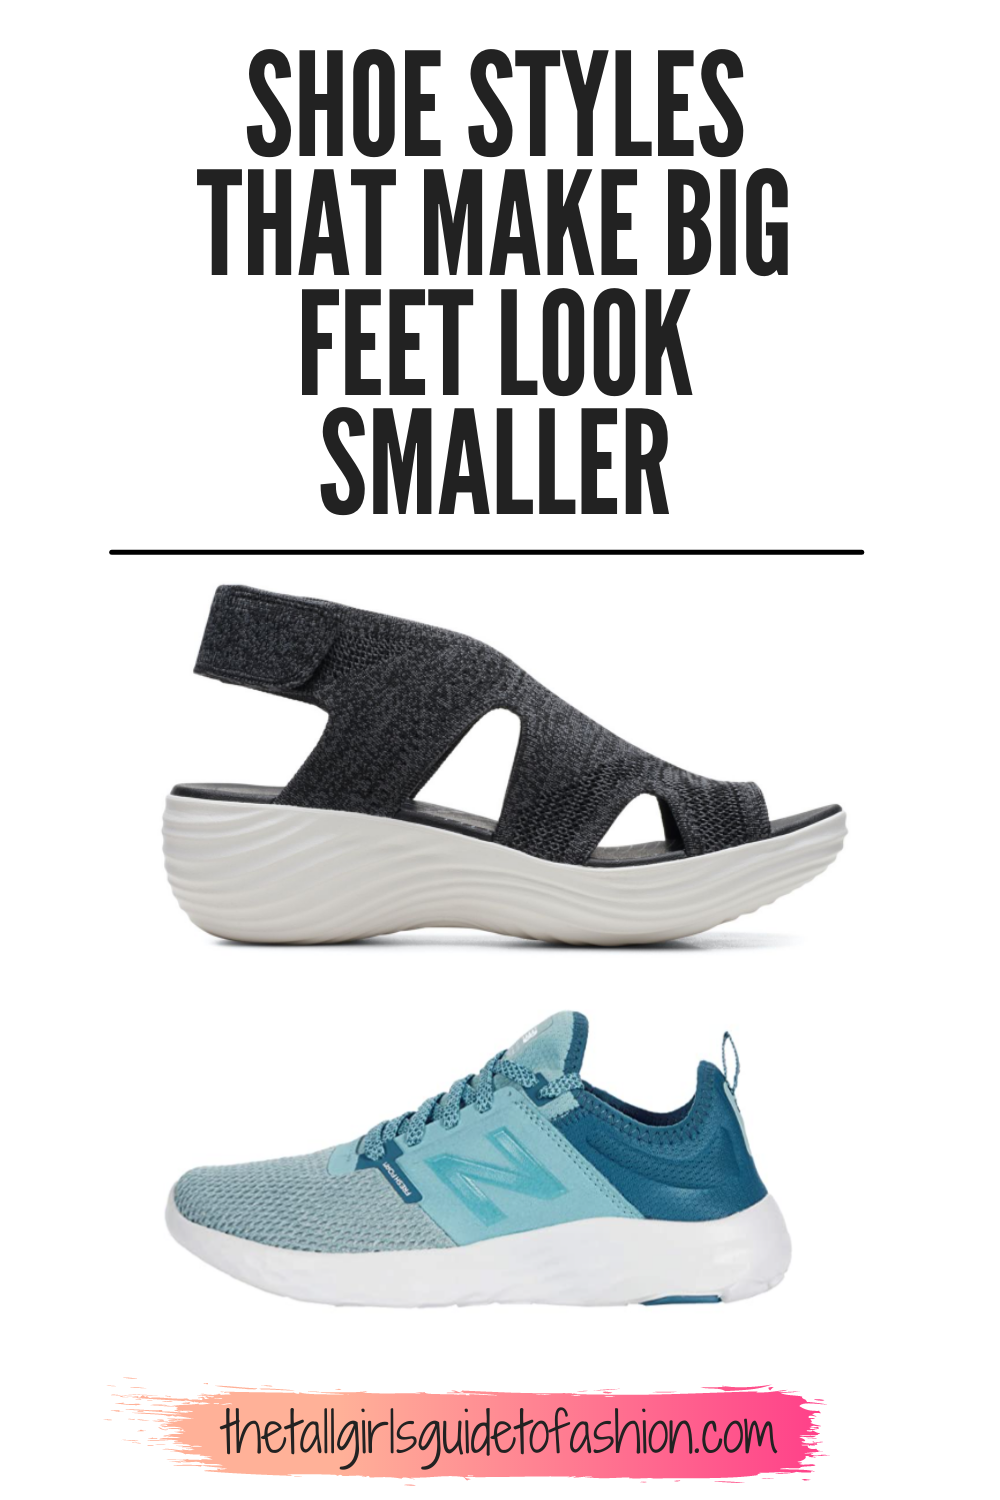 Total 95+ imagen shoes that make your feet look bigger - Abzlocal.mx